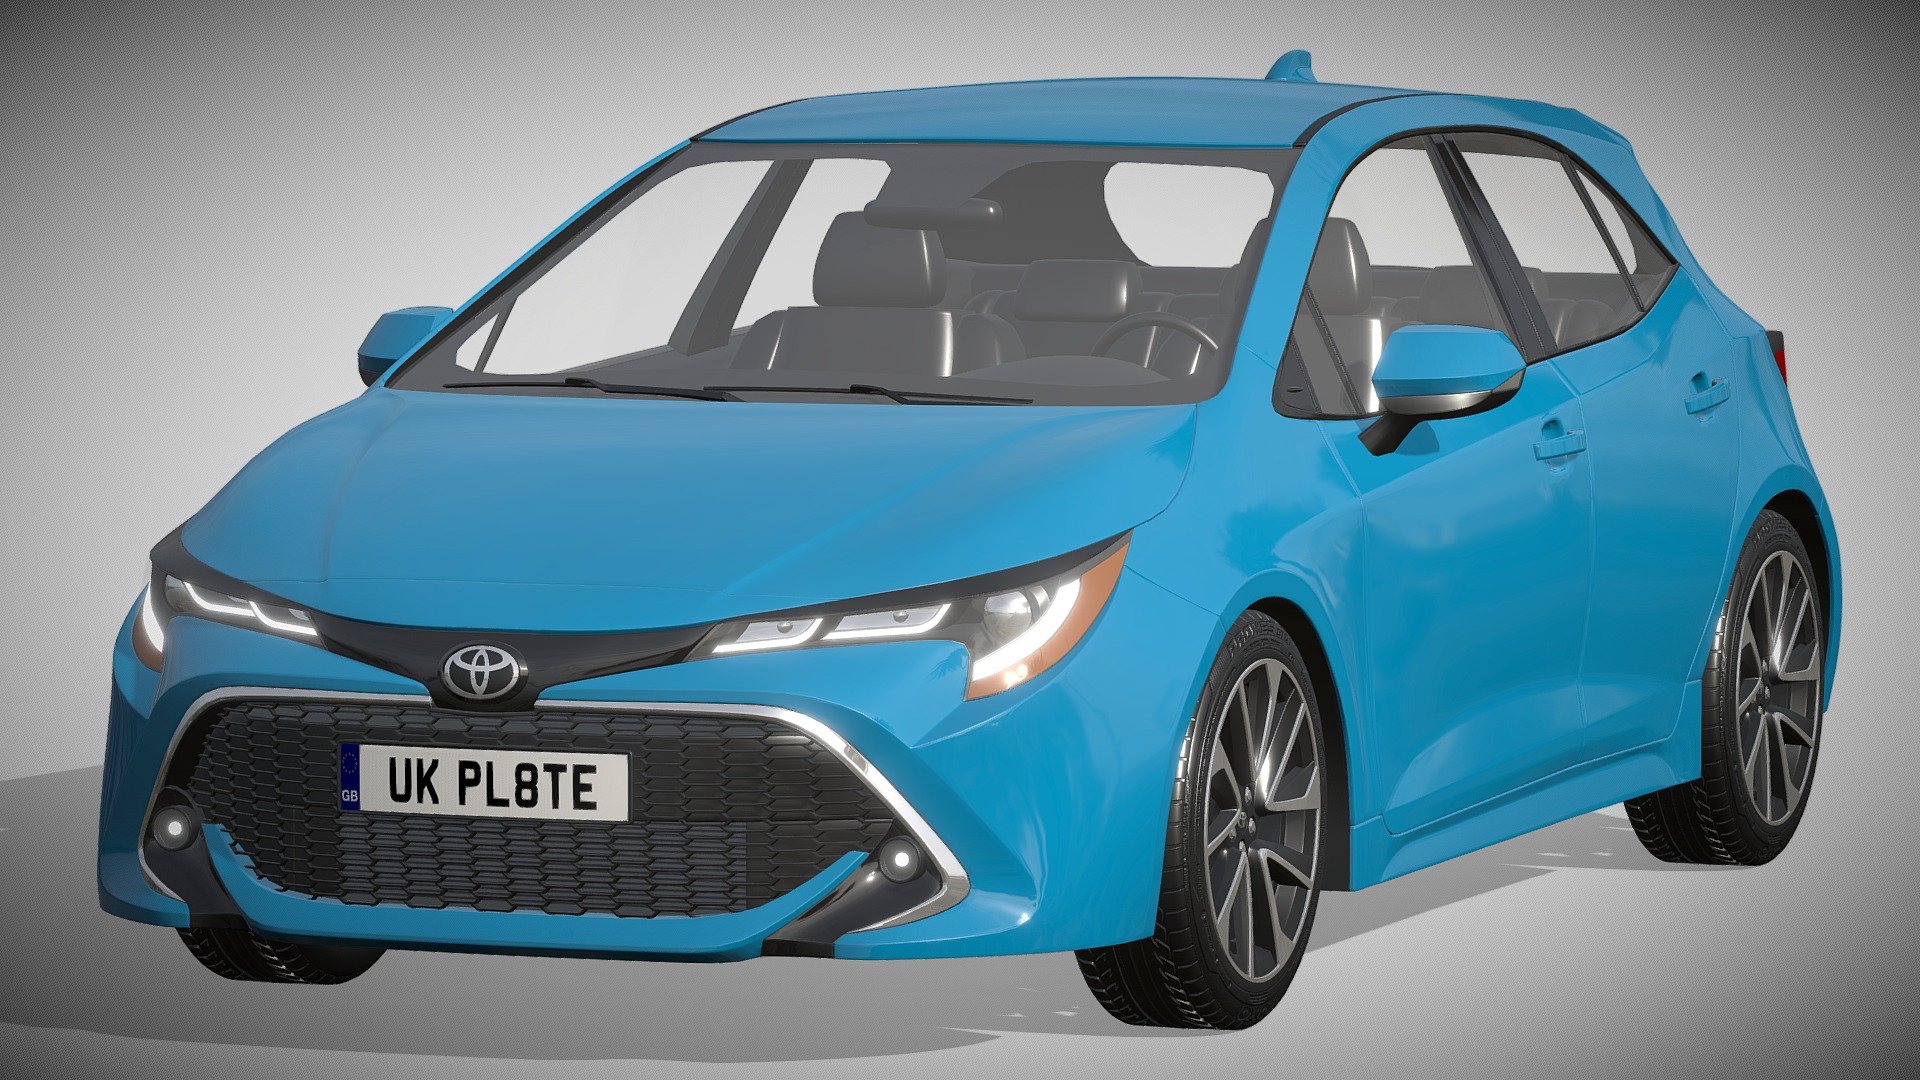 Toyota Corolla Hatchback 2021

https://www.toyota.com/corollahatchback/2021/

Clean geometry Light weight model, yet completely detailed for HI-Res renders. Use for movies, Advertisements or games

Corona render and materials

All textures include in *.rar files

Lighting setup is not included in the file! - Toyota Corolla Hatchback 2021 - Buy Royalty Free 3D model by zifir3d 3d model